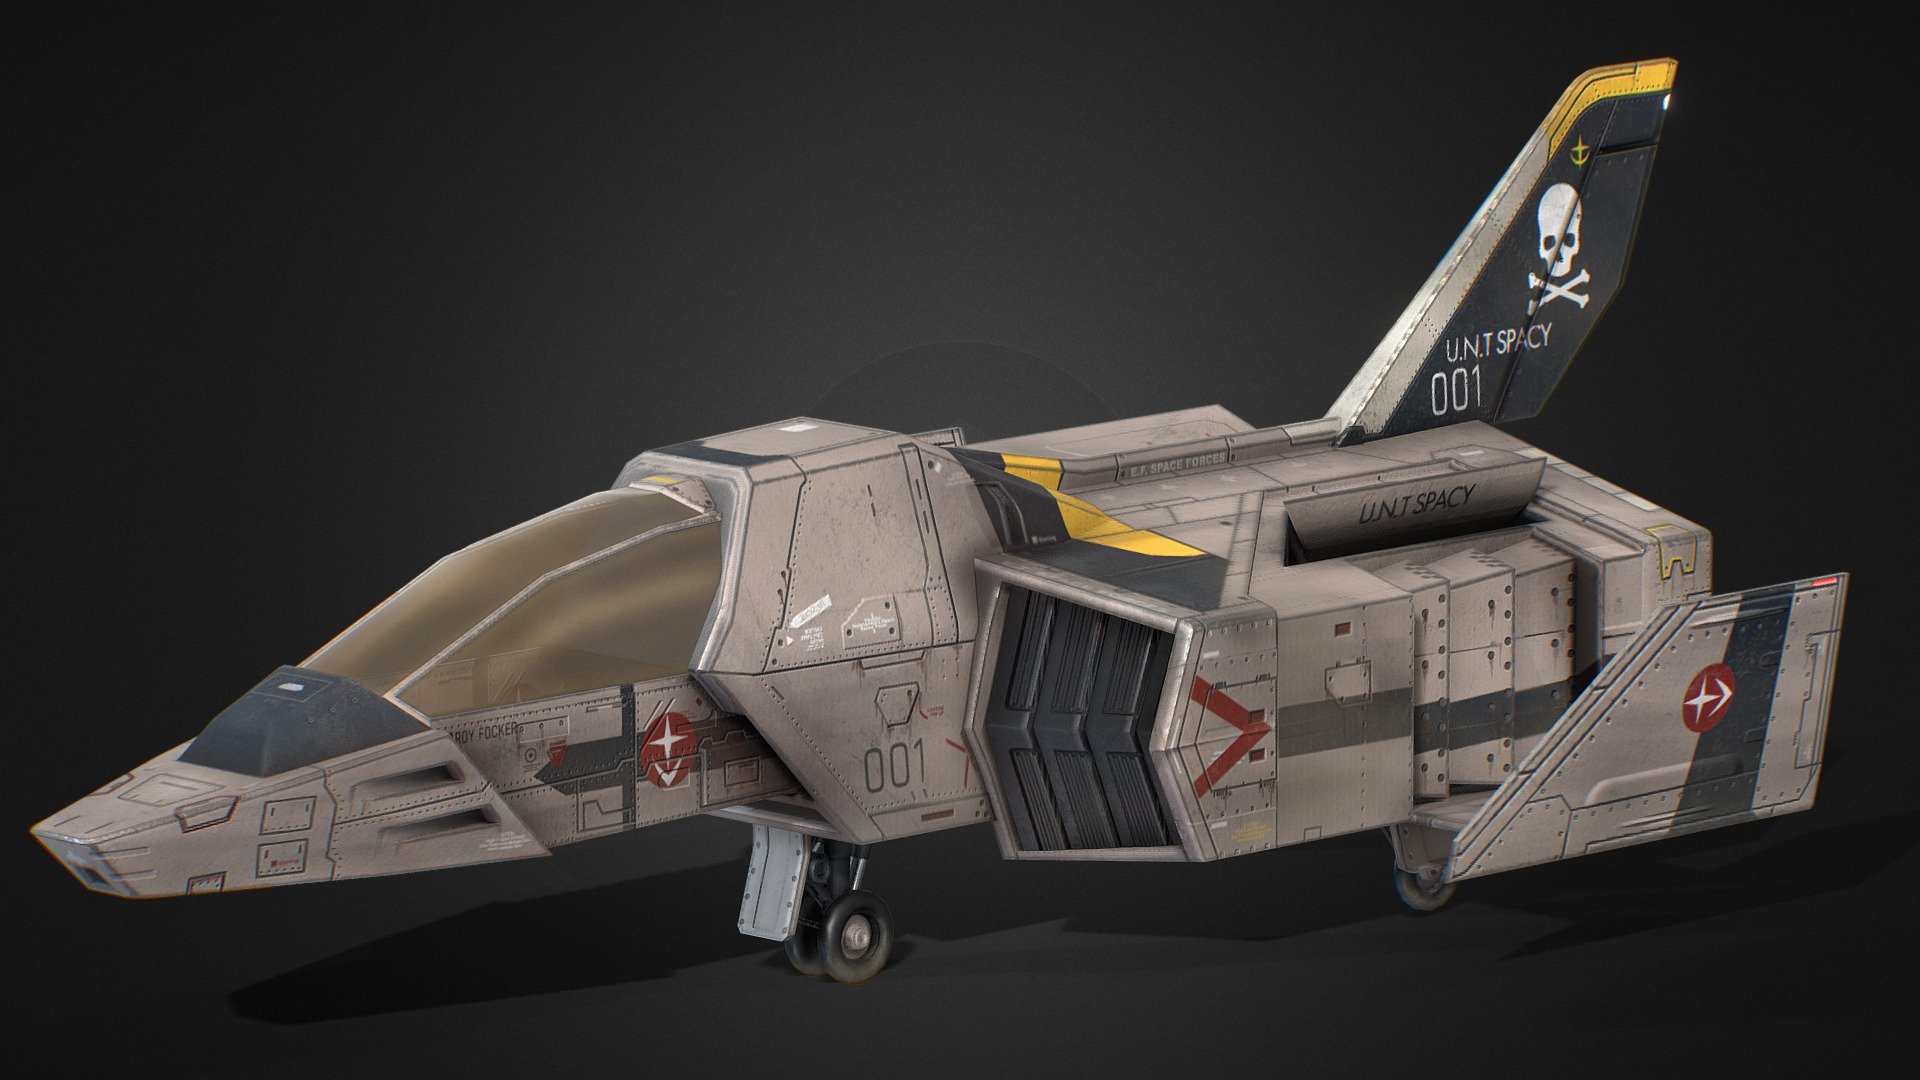 FF-X7 Core Fighter using Roy Focker Colour from Macross
This model was made for One Year War mod of Hearts of Iron IV. 
Our Mod Steam Home Page https://steamcommunity.com/sharedfiles/filedetails/?id=2064985570 - FF-X7 Core Fighter Ver. Macross - 3D model by One Year War Mod (@hoi4oneyearwar) 3d model